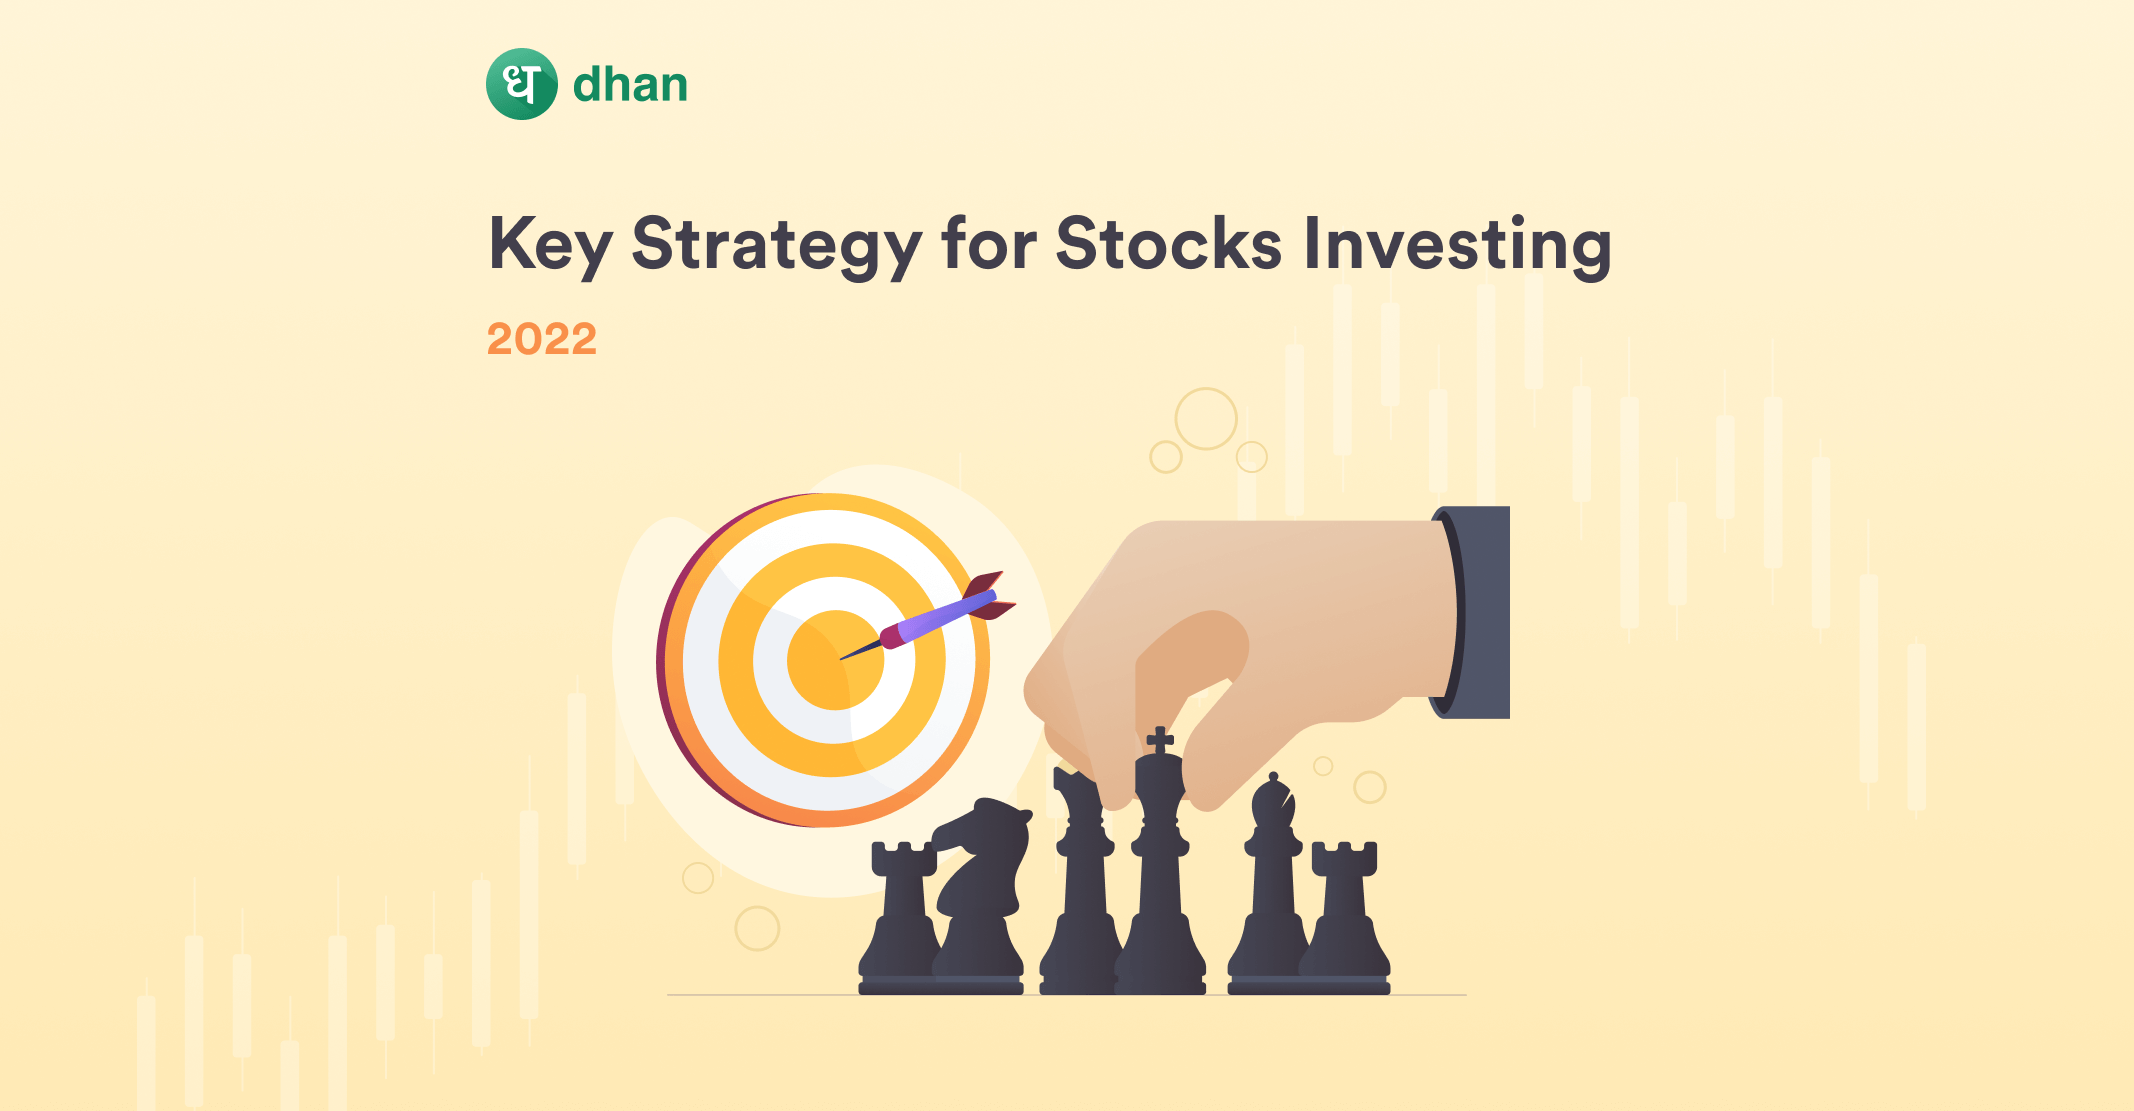 Investment Strategy 2022 - 4 Key Points for Investing in Stocks